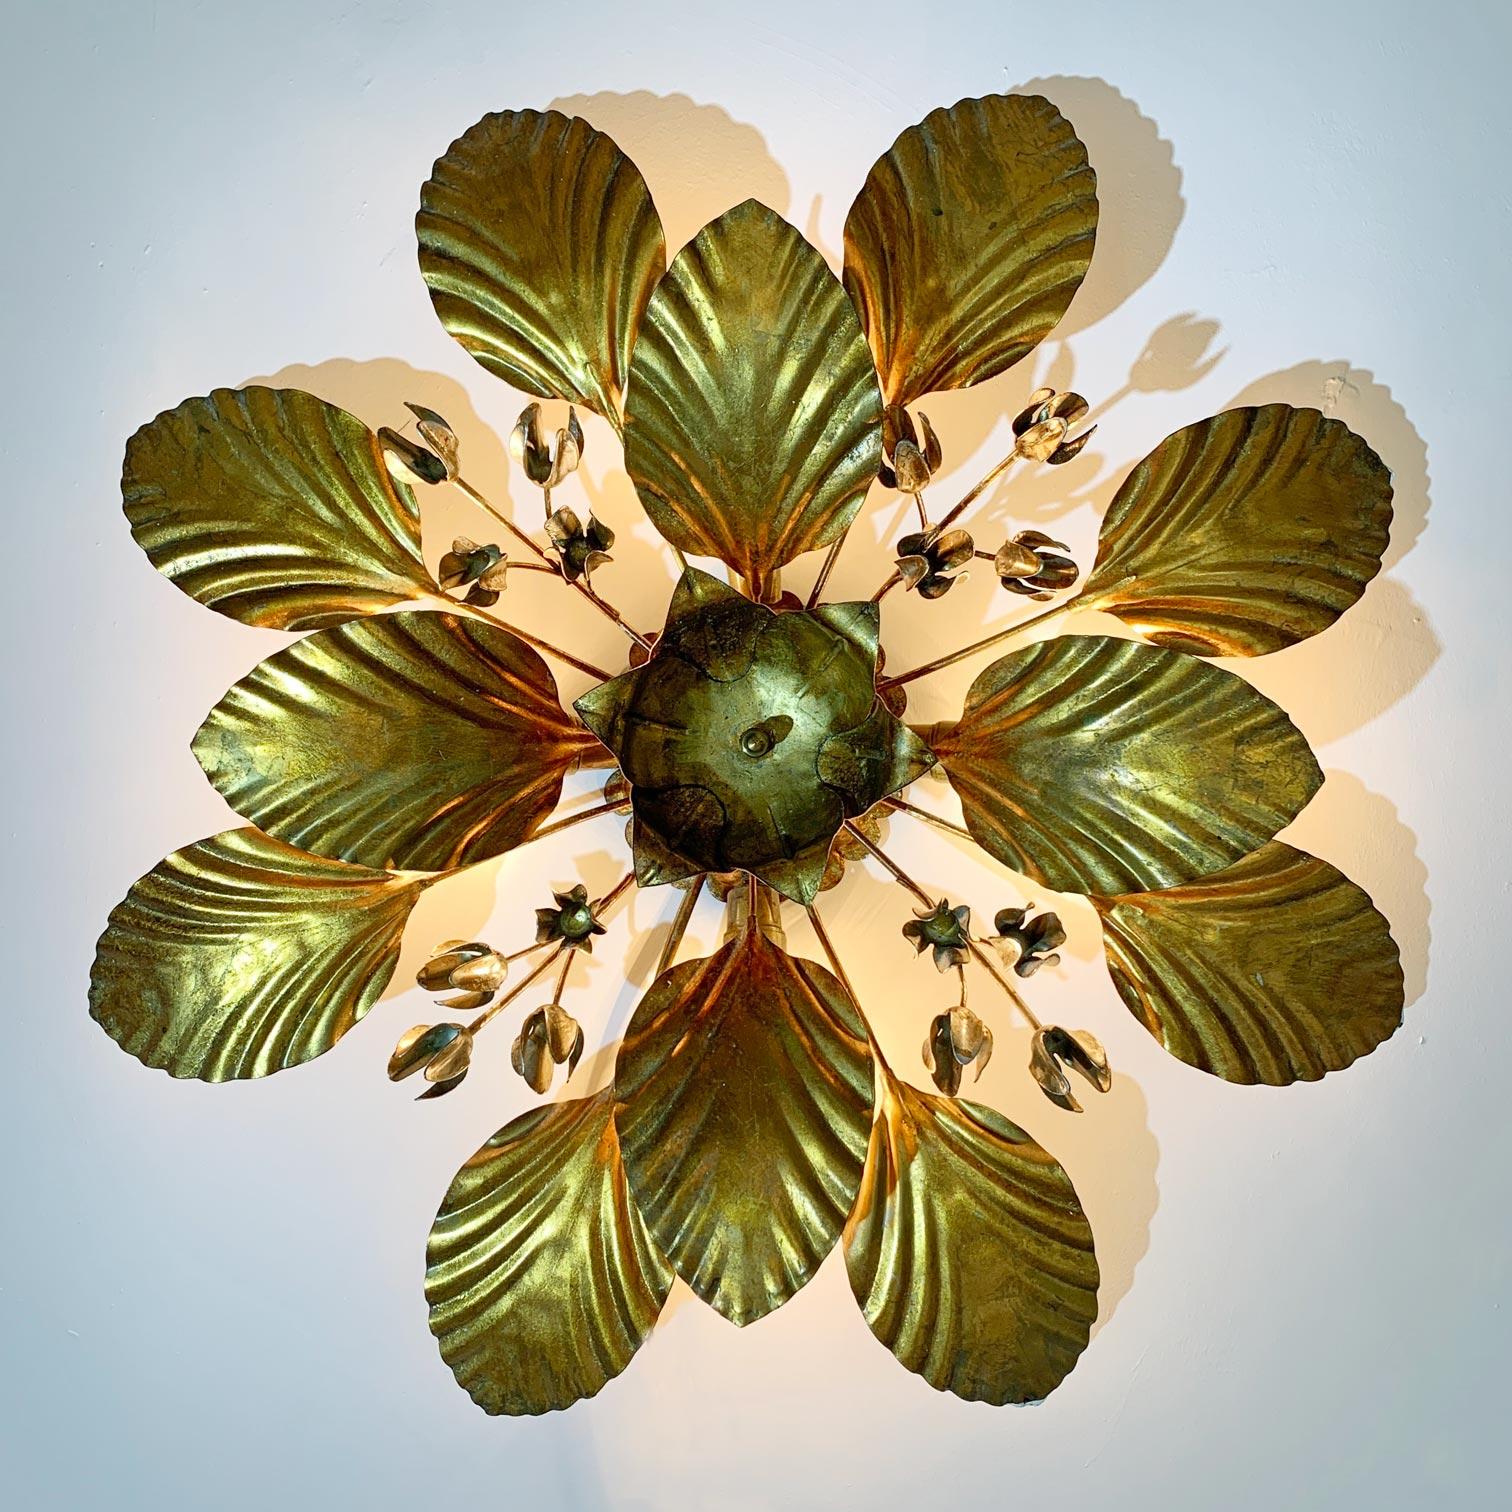 Large gilt leaves surrounding stems with silver flower bells, form these floral shaped flush lights

By Hans Kogl, Germany 1970's

These are Hans Kogl original light fittings from the 70's, not modern Kogl Lighting reproductions

We have 3 of these